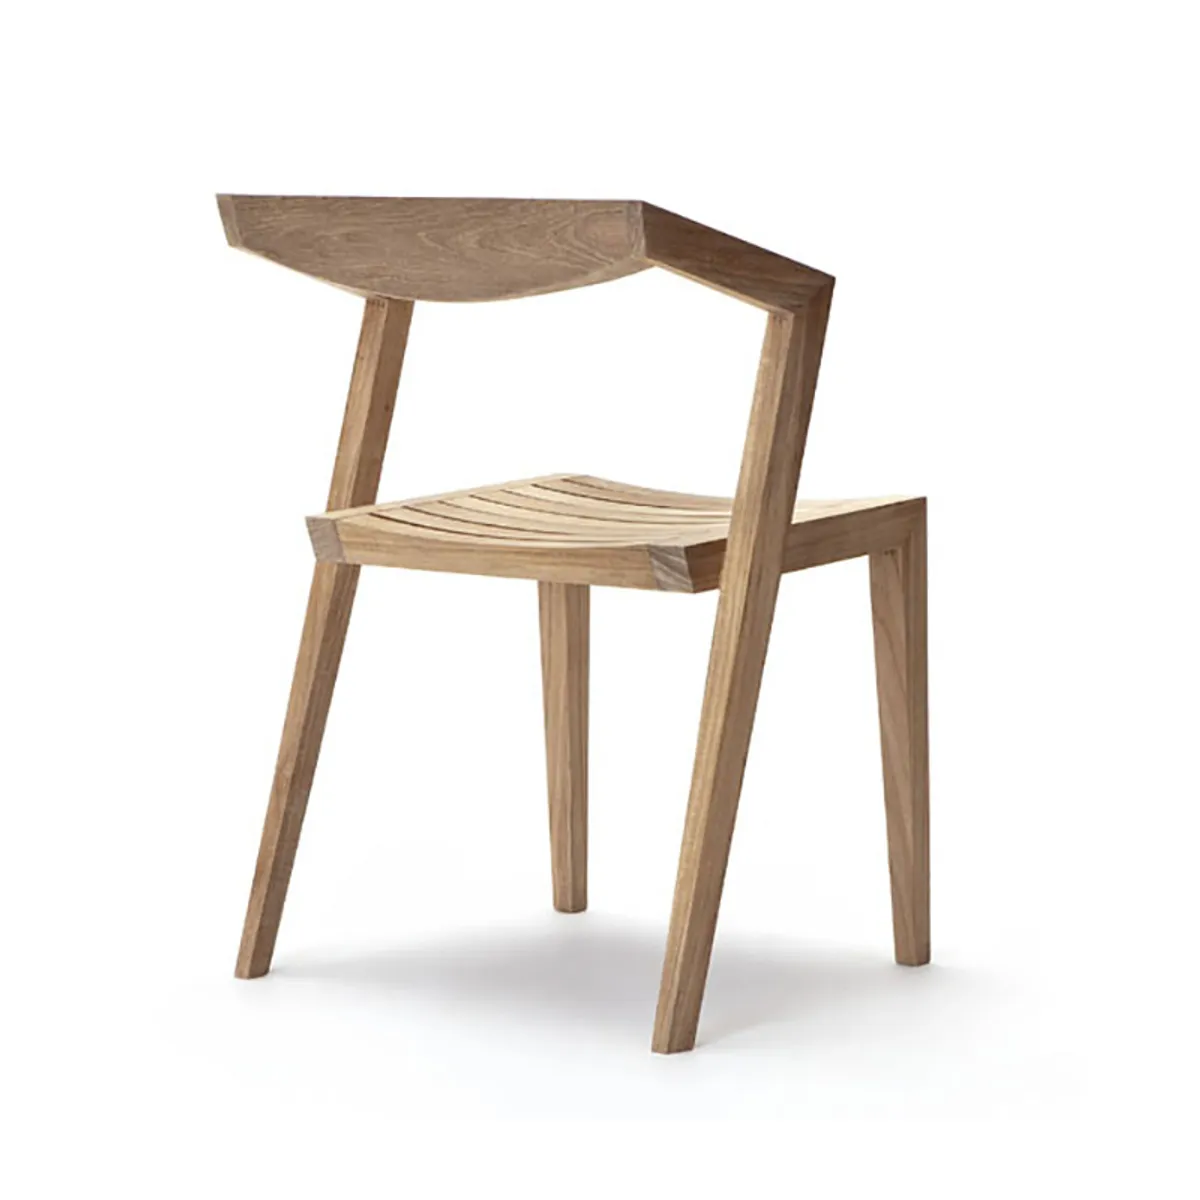 Borough Side Chair Stacking Outdoor Furniture In Teak Wood 077